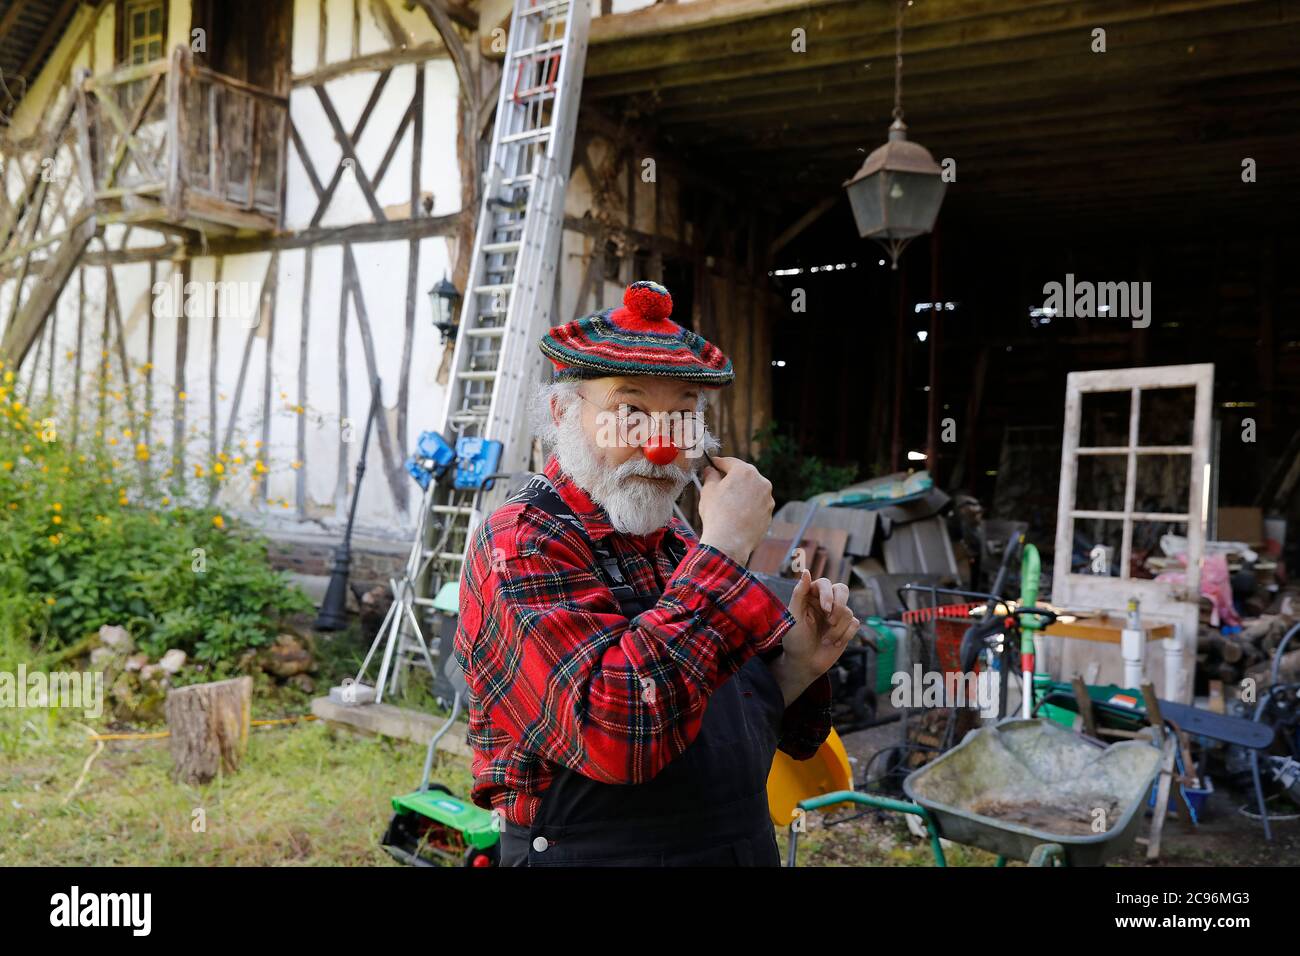 Clown making up in Champignolles, France. Stock Photo